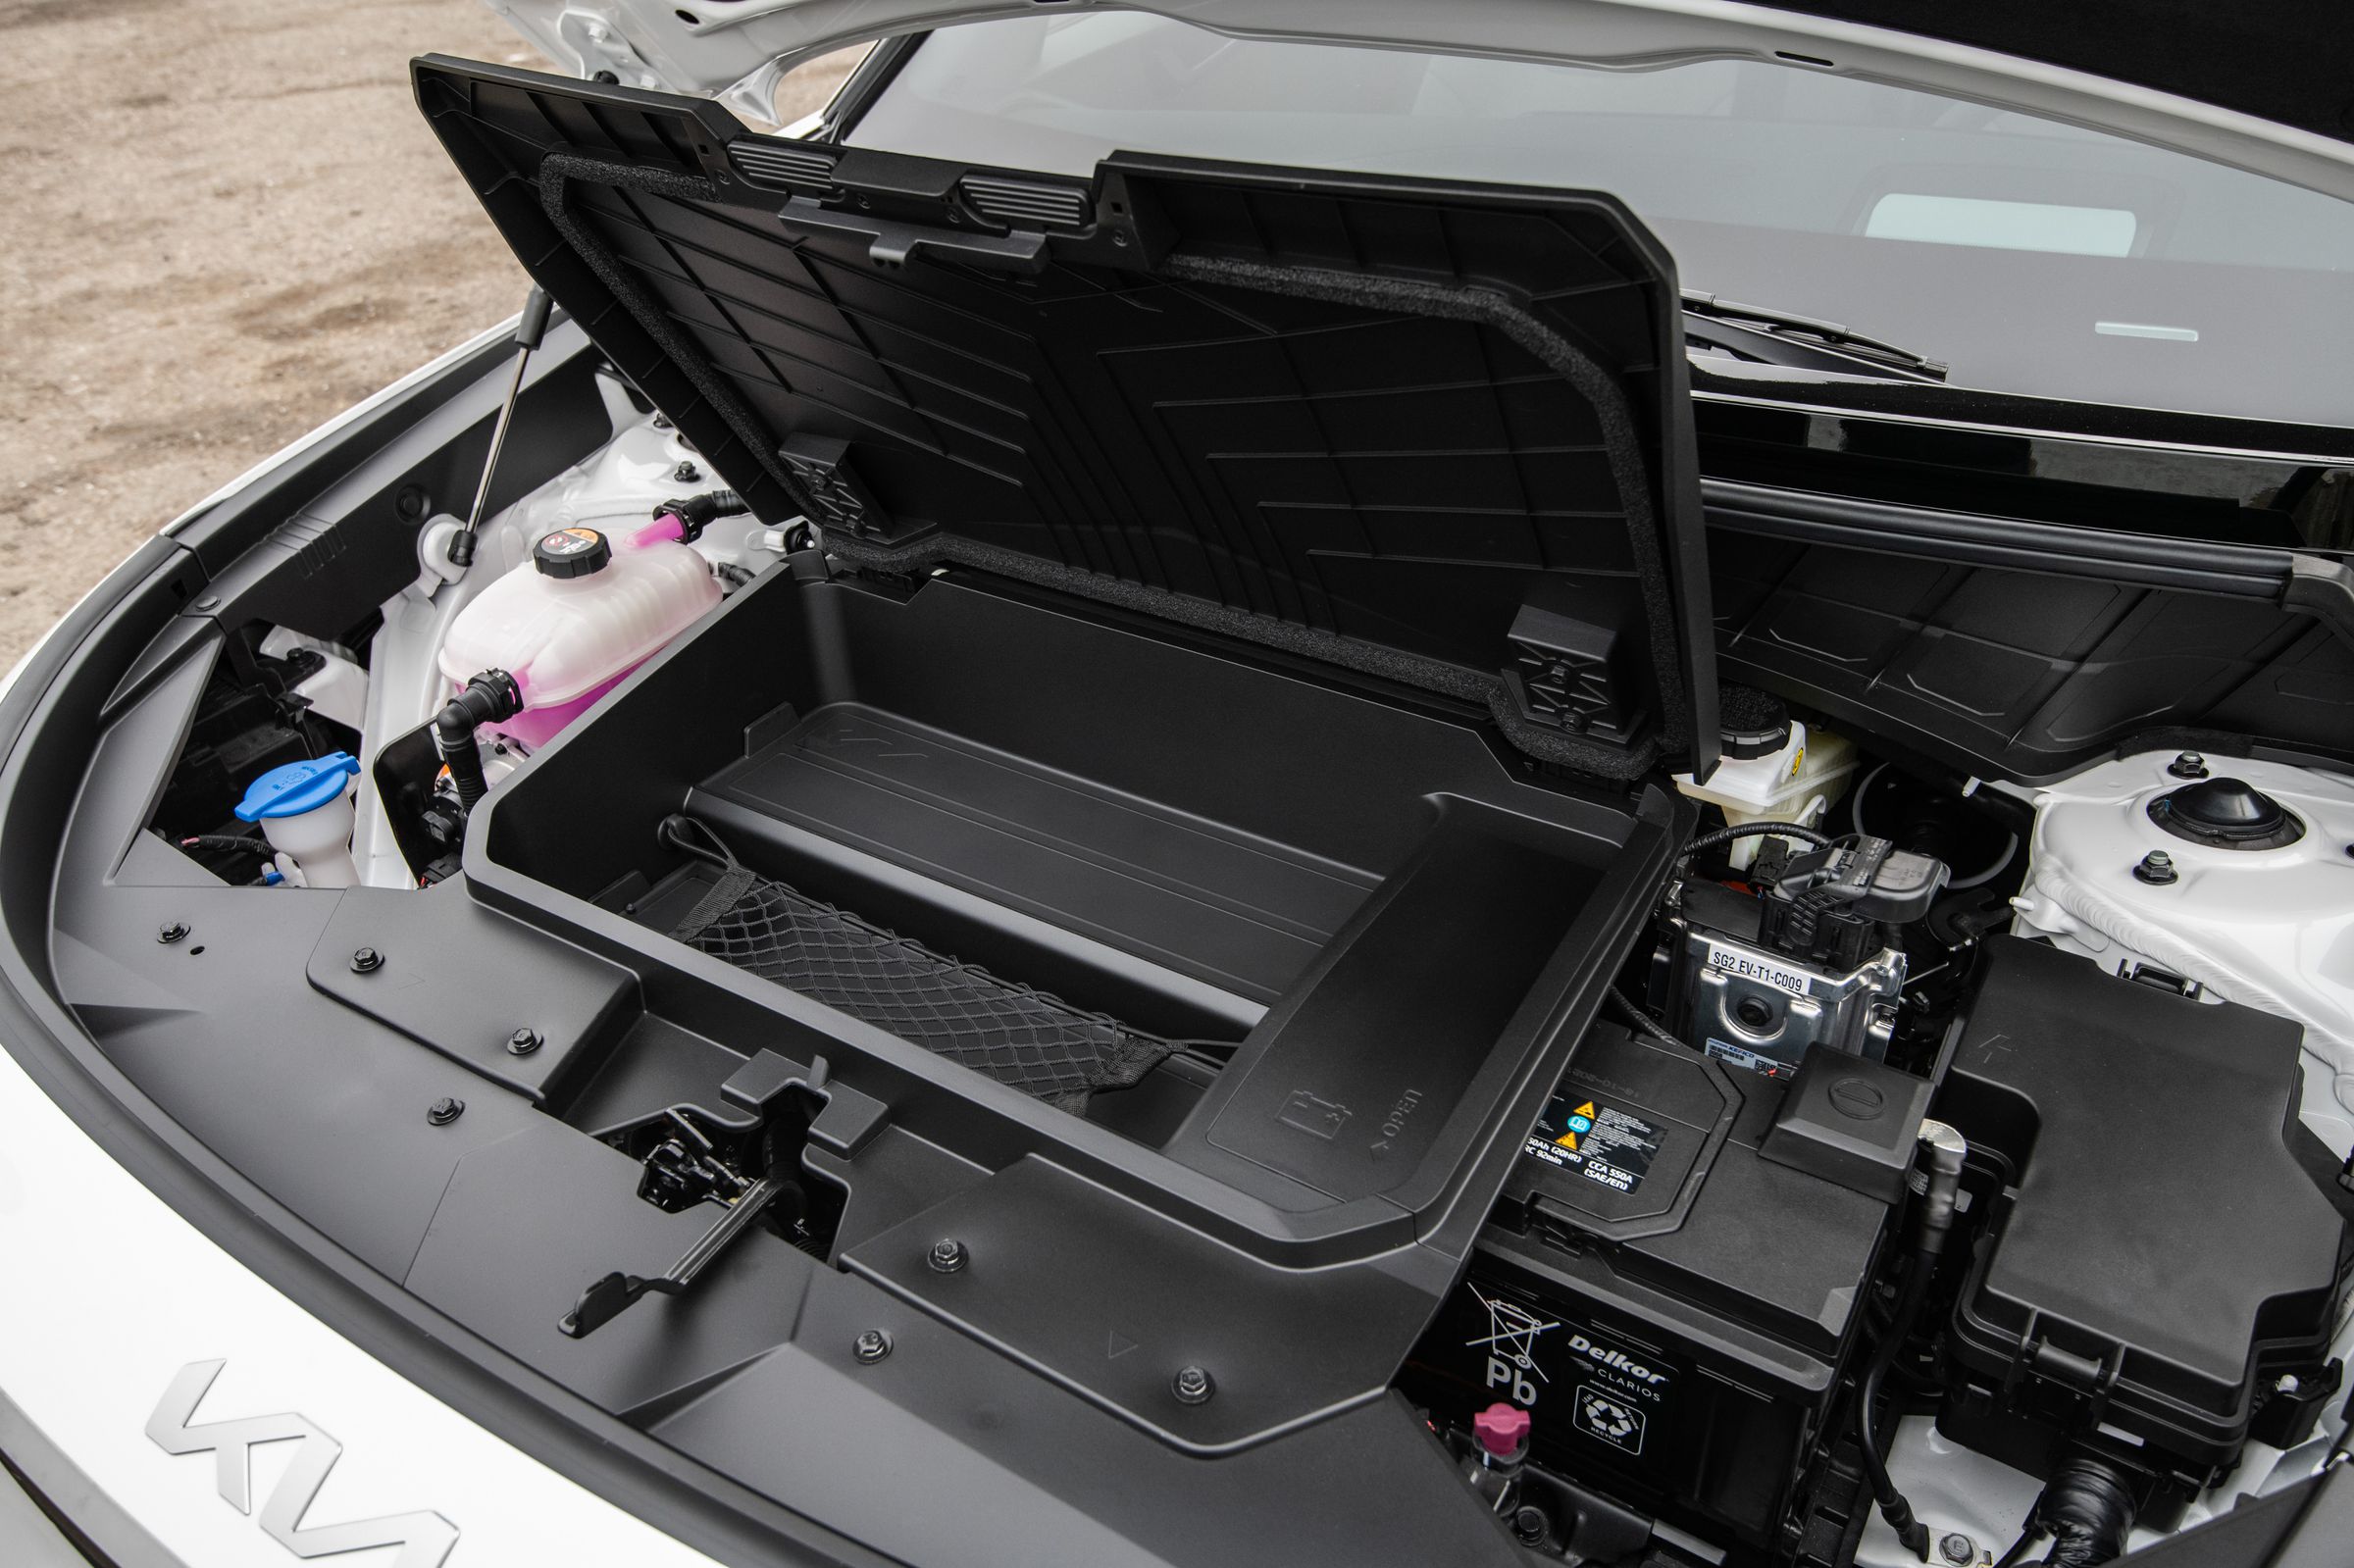 <em>The Niro EV has a small front cargo space that can hold one personal item like a backpack.</em>